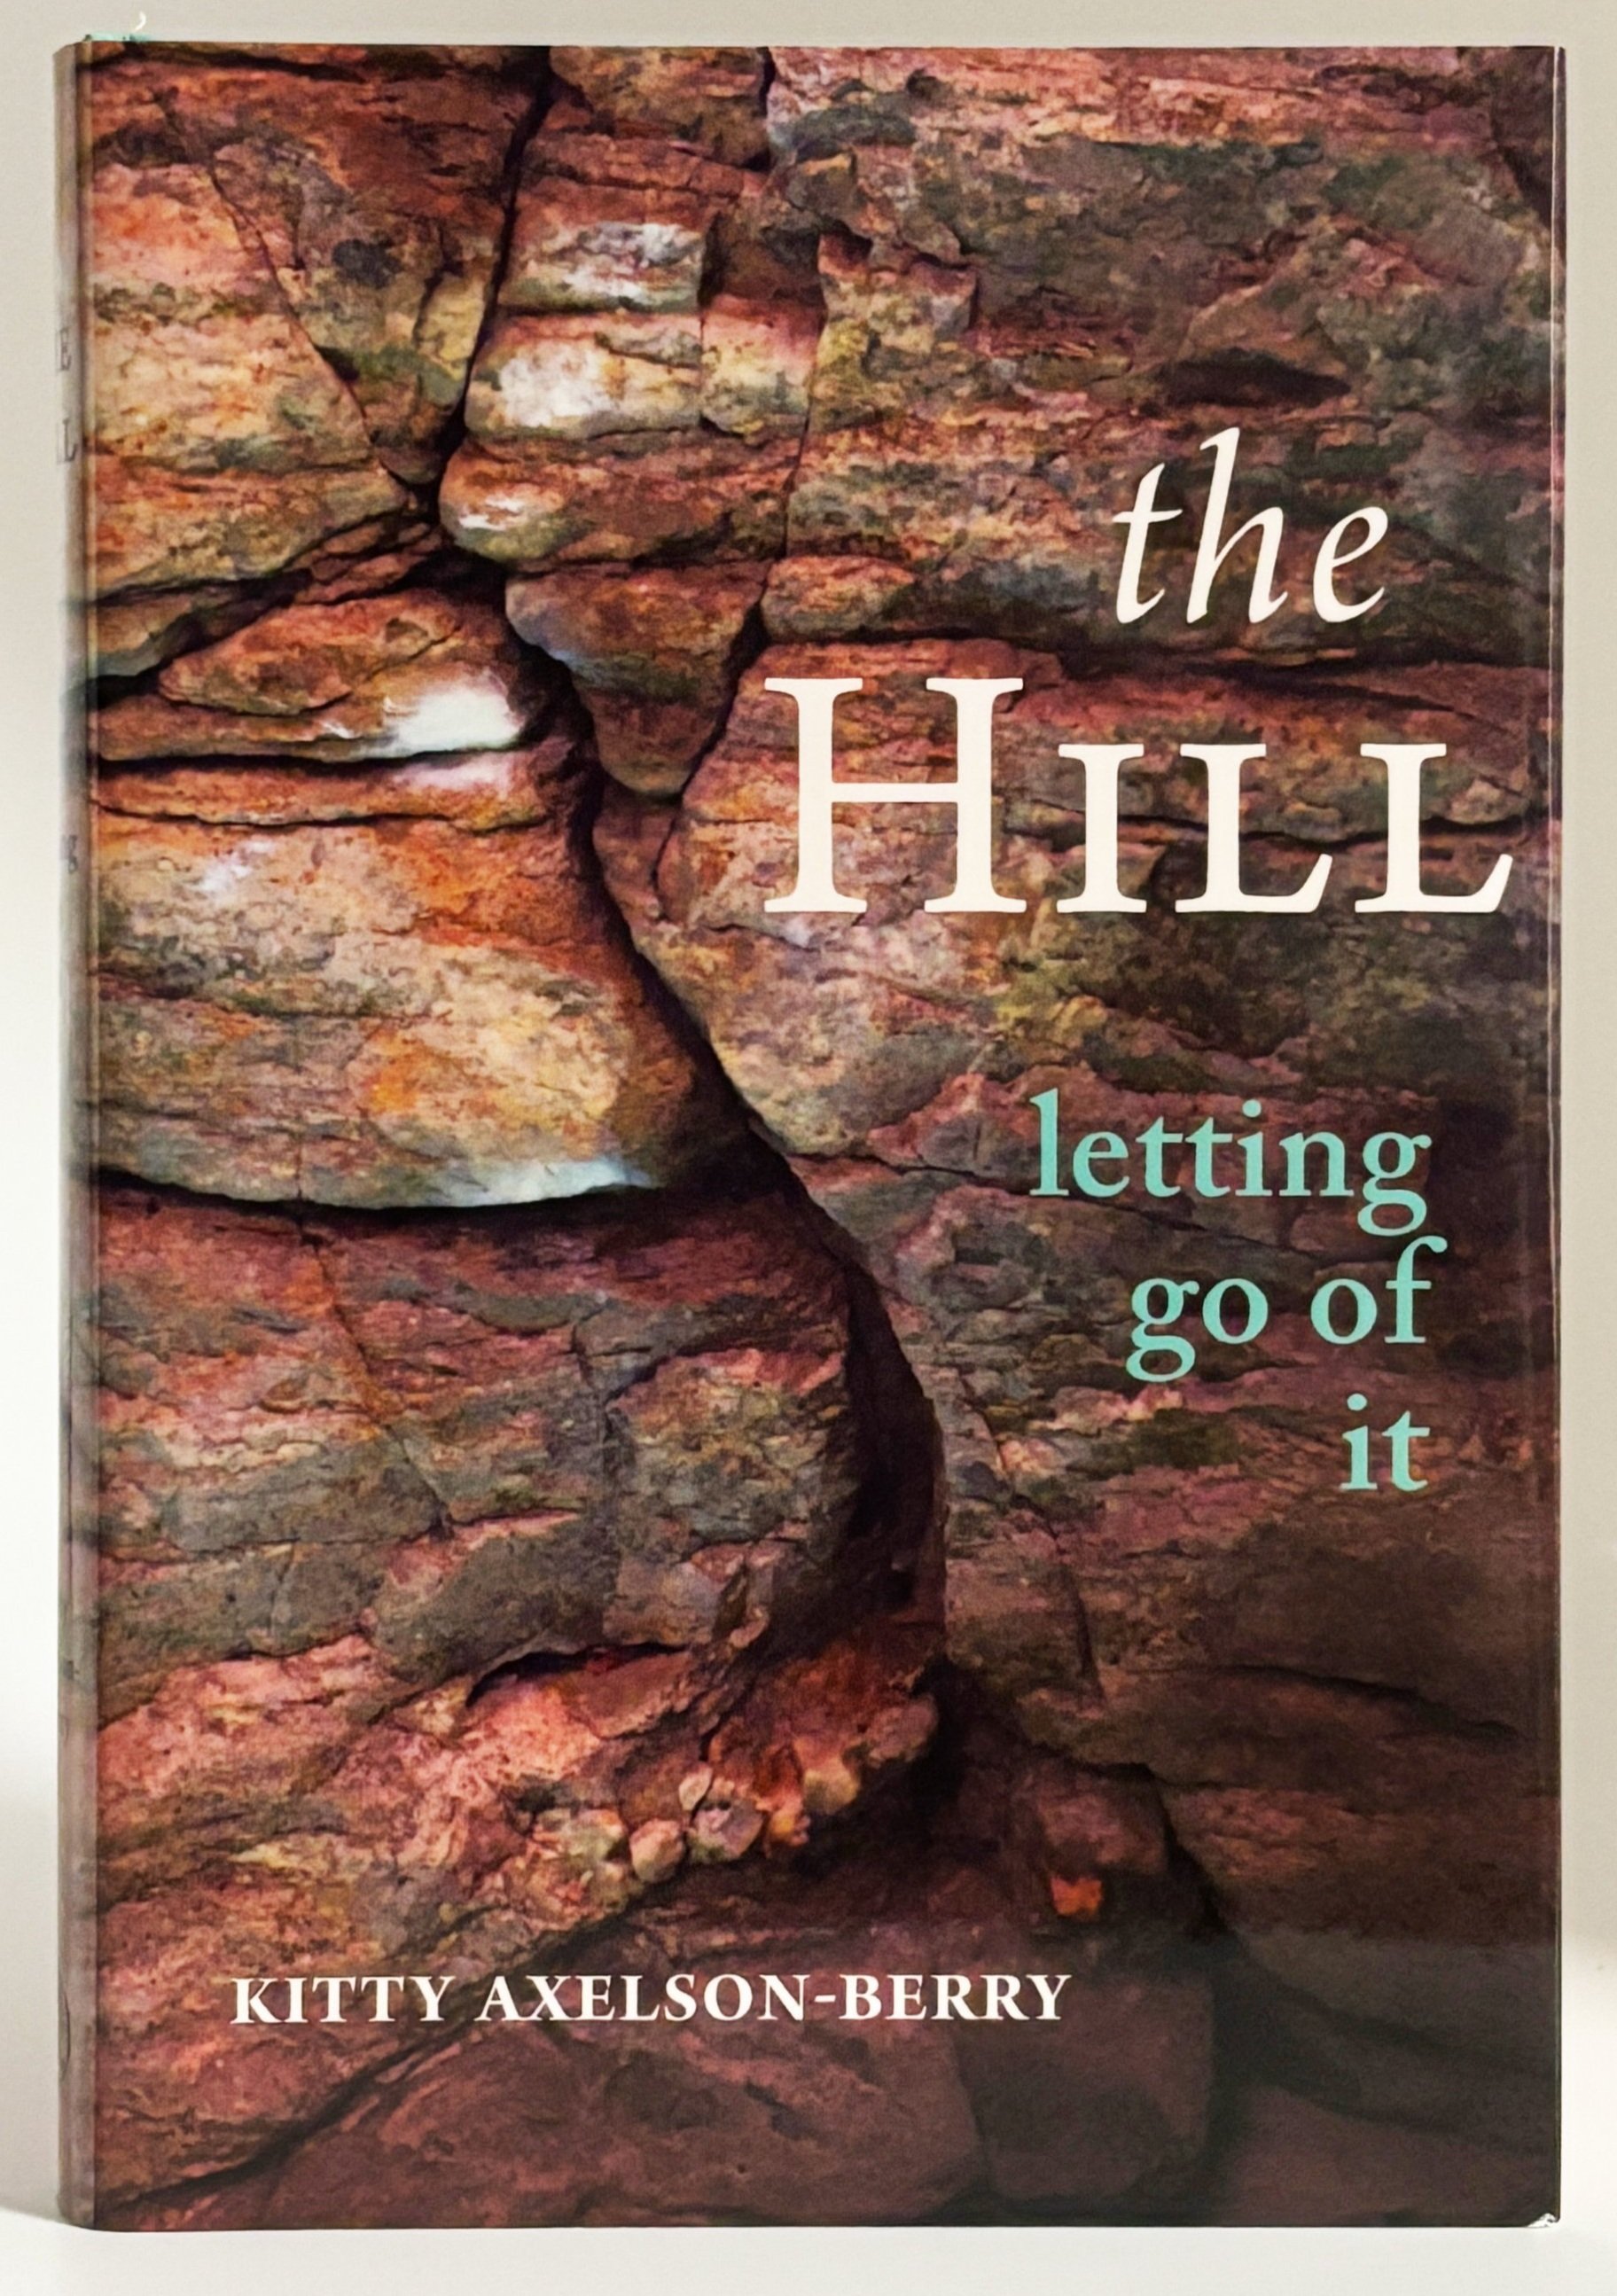 The Hill, letting go of it (2018)